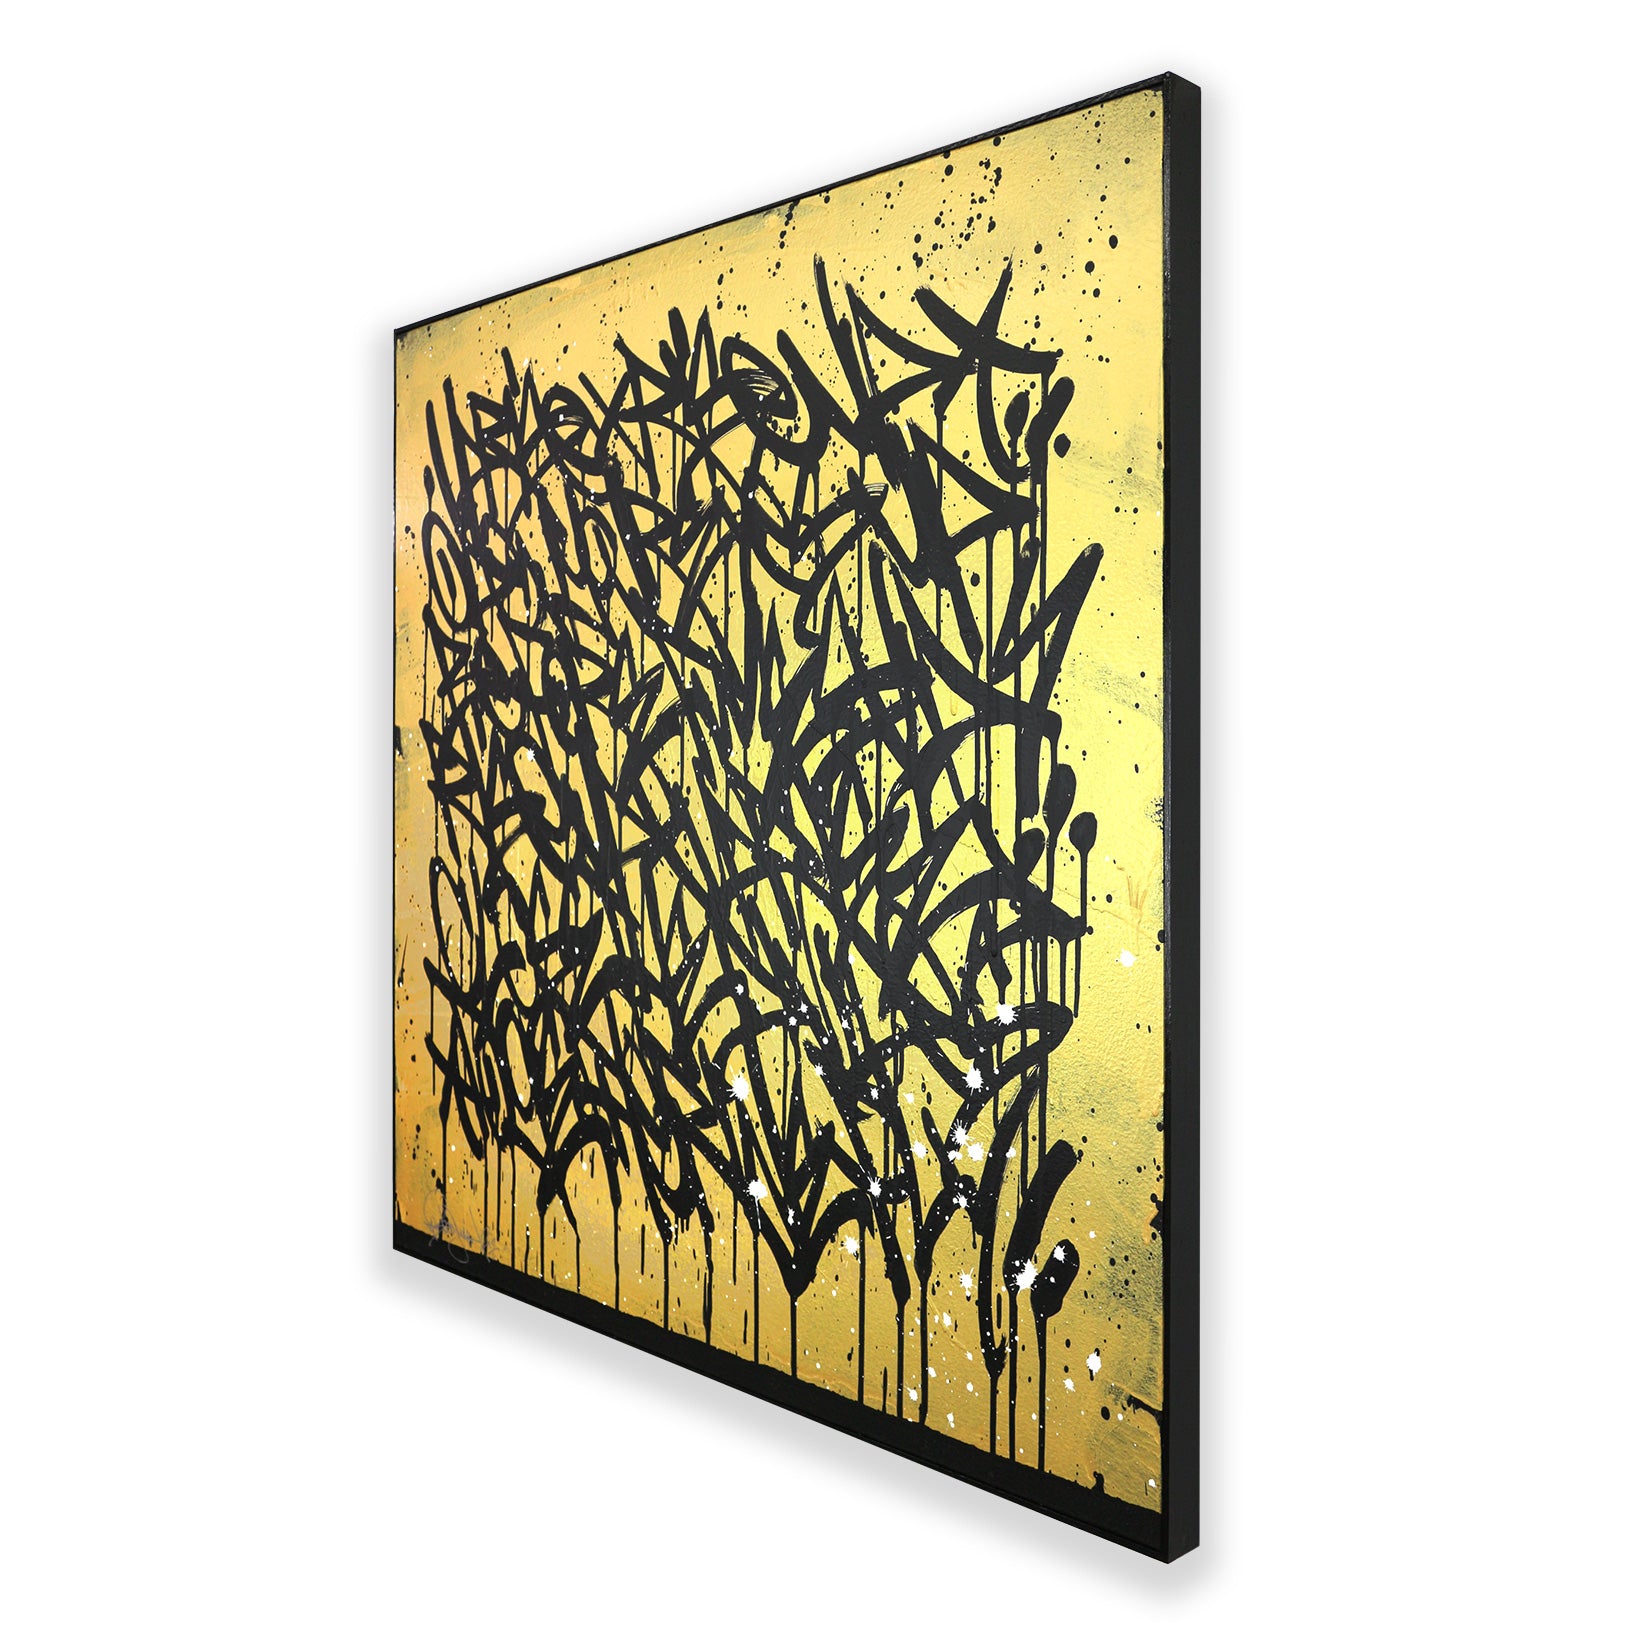 SOLID GOLD - 40X40 - Bisco Smith